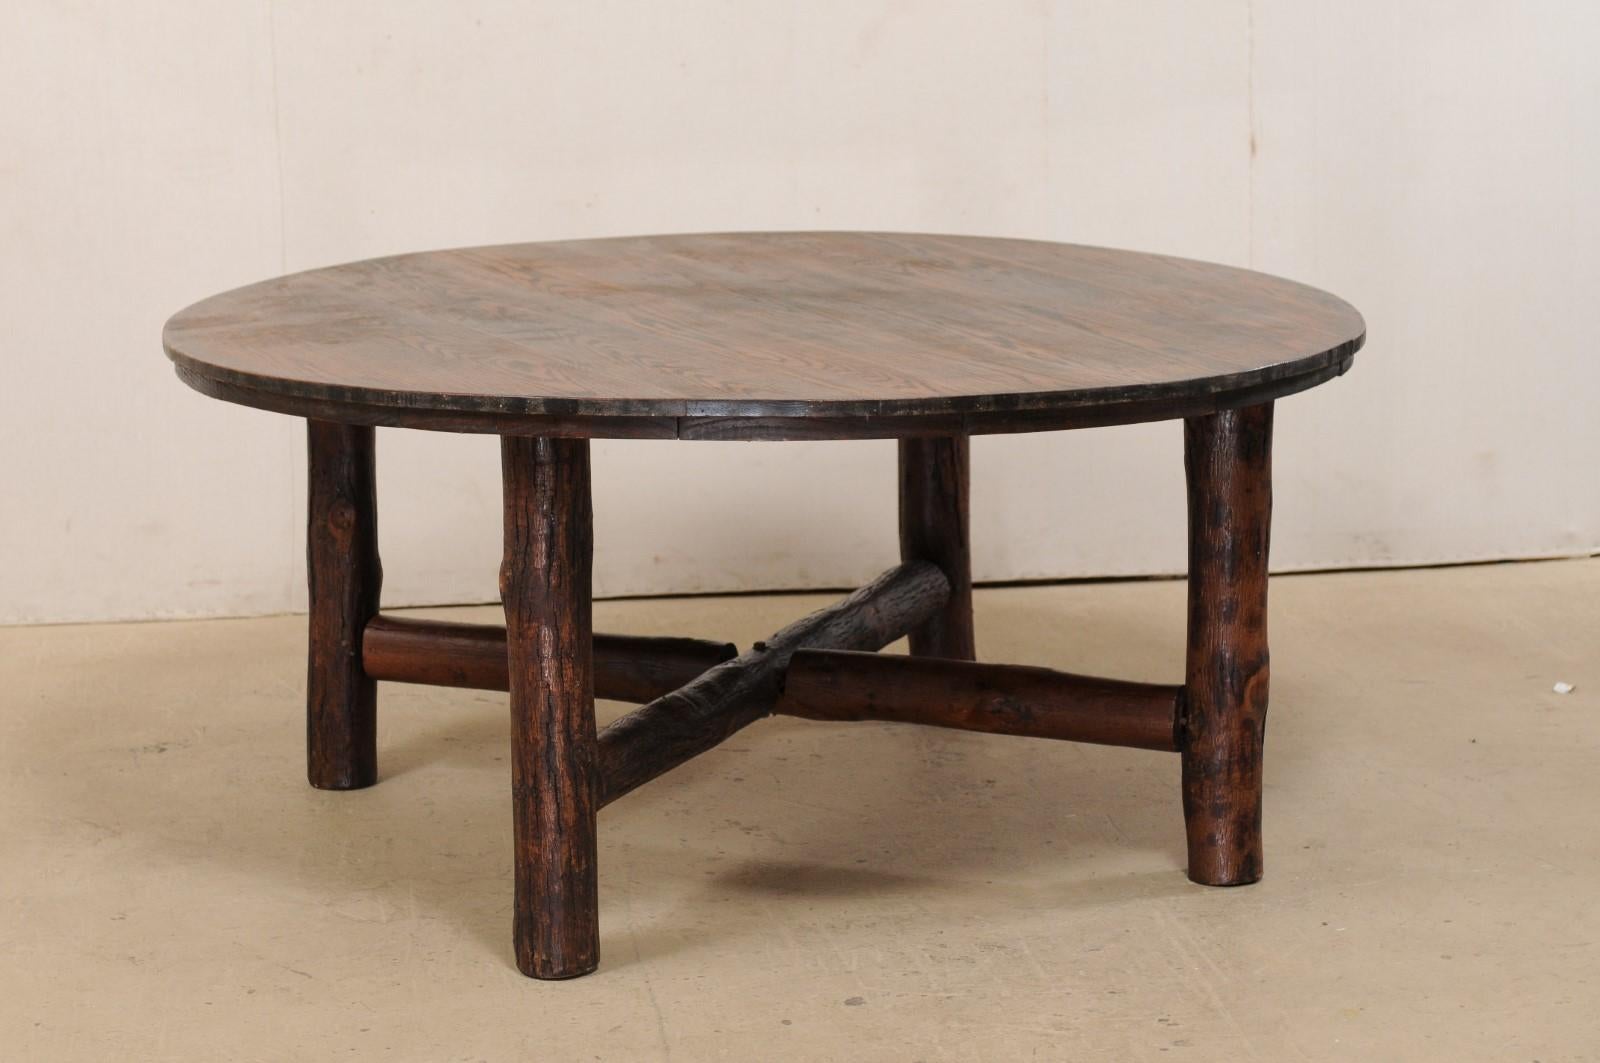 A beautifully rustic American Old Hickory round table with cross X-stretcher from the 1920s. This antique Old Hickory table is a rare style, and features a round top which is almost 5.5 feet in diameter, and is raised upon four sturdy post legs,